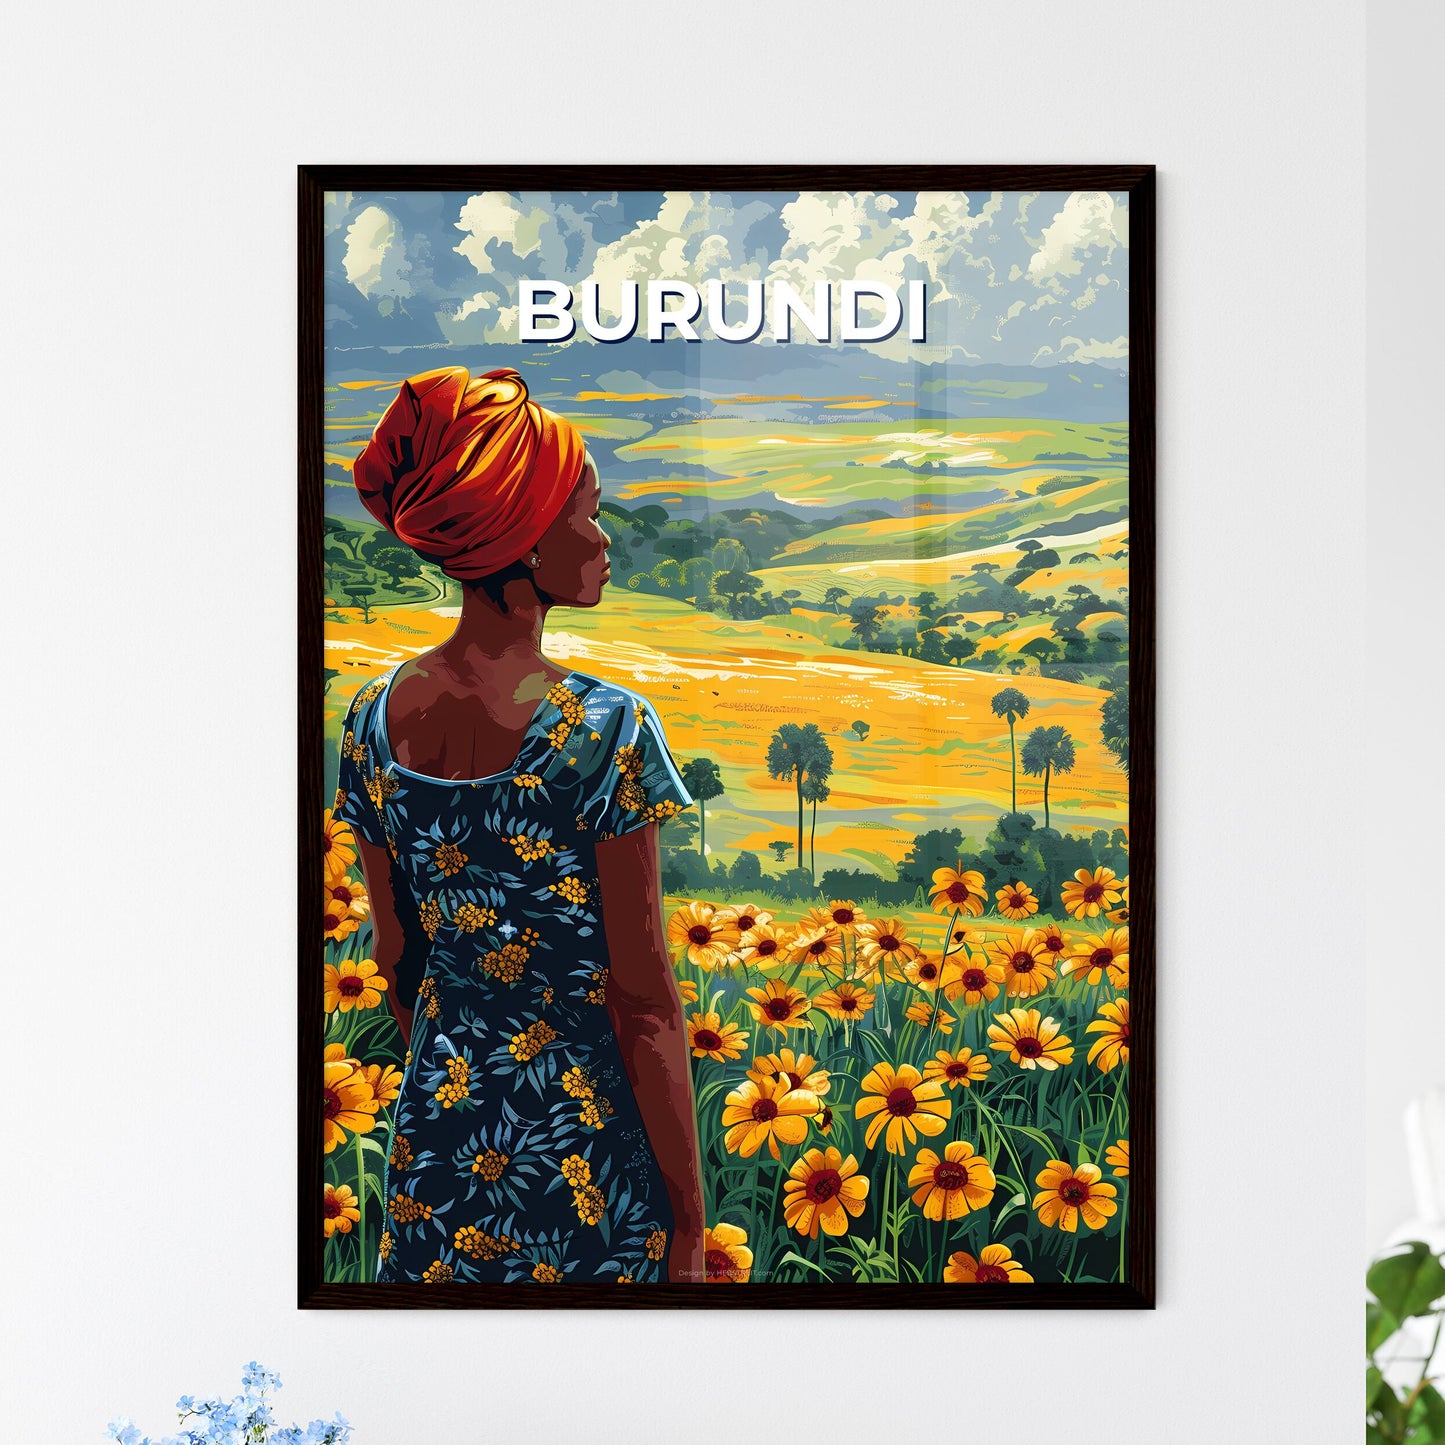 Vibrant African Art Painting Depicting Woman in Dress and Turban Amidst Flower Garden